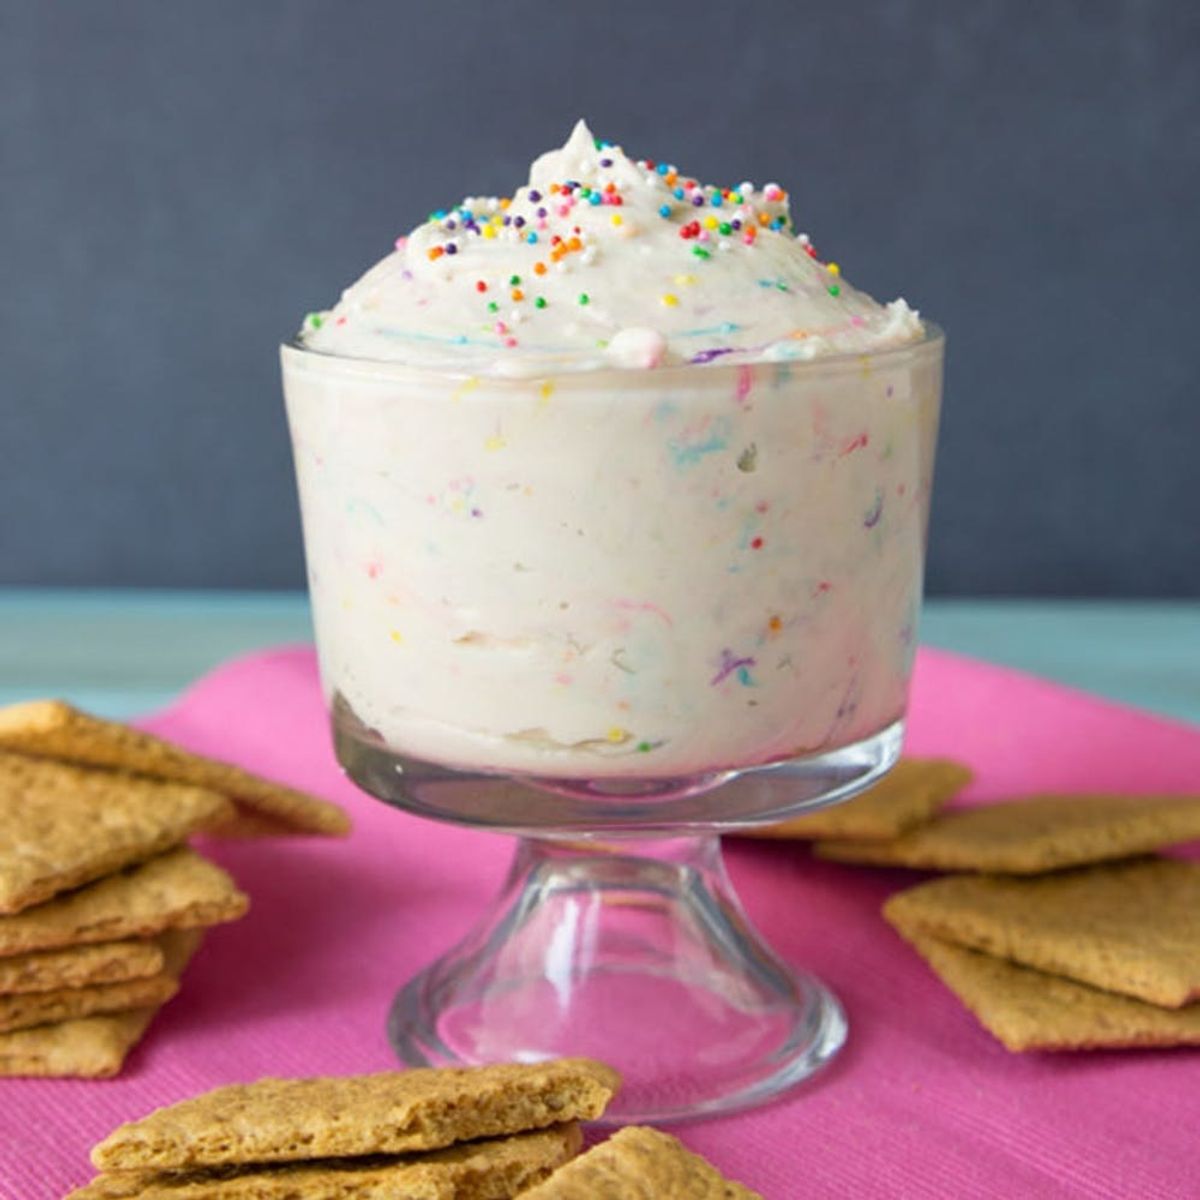 15 Sweet Recipes to Help You Dip Your Dessert